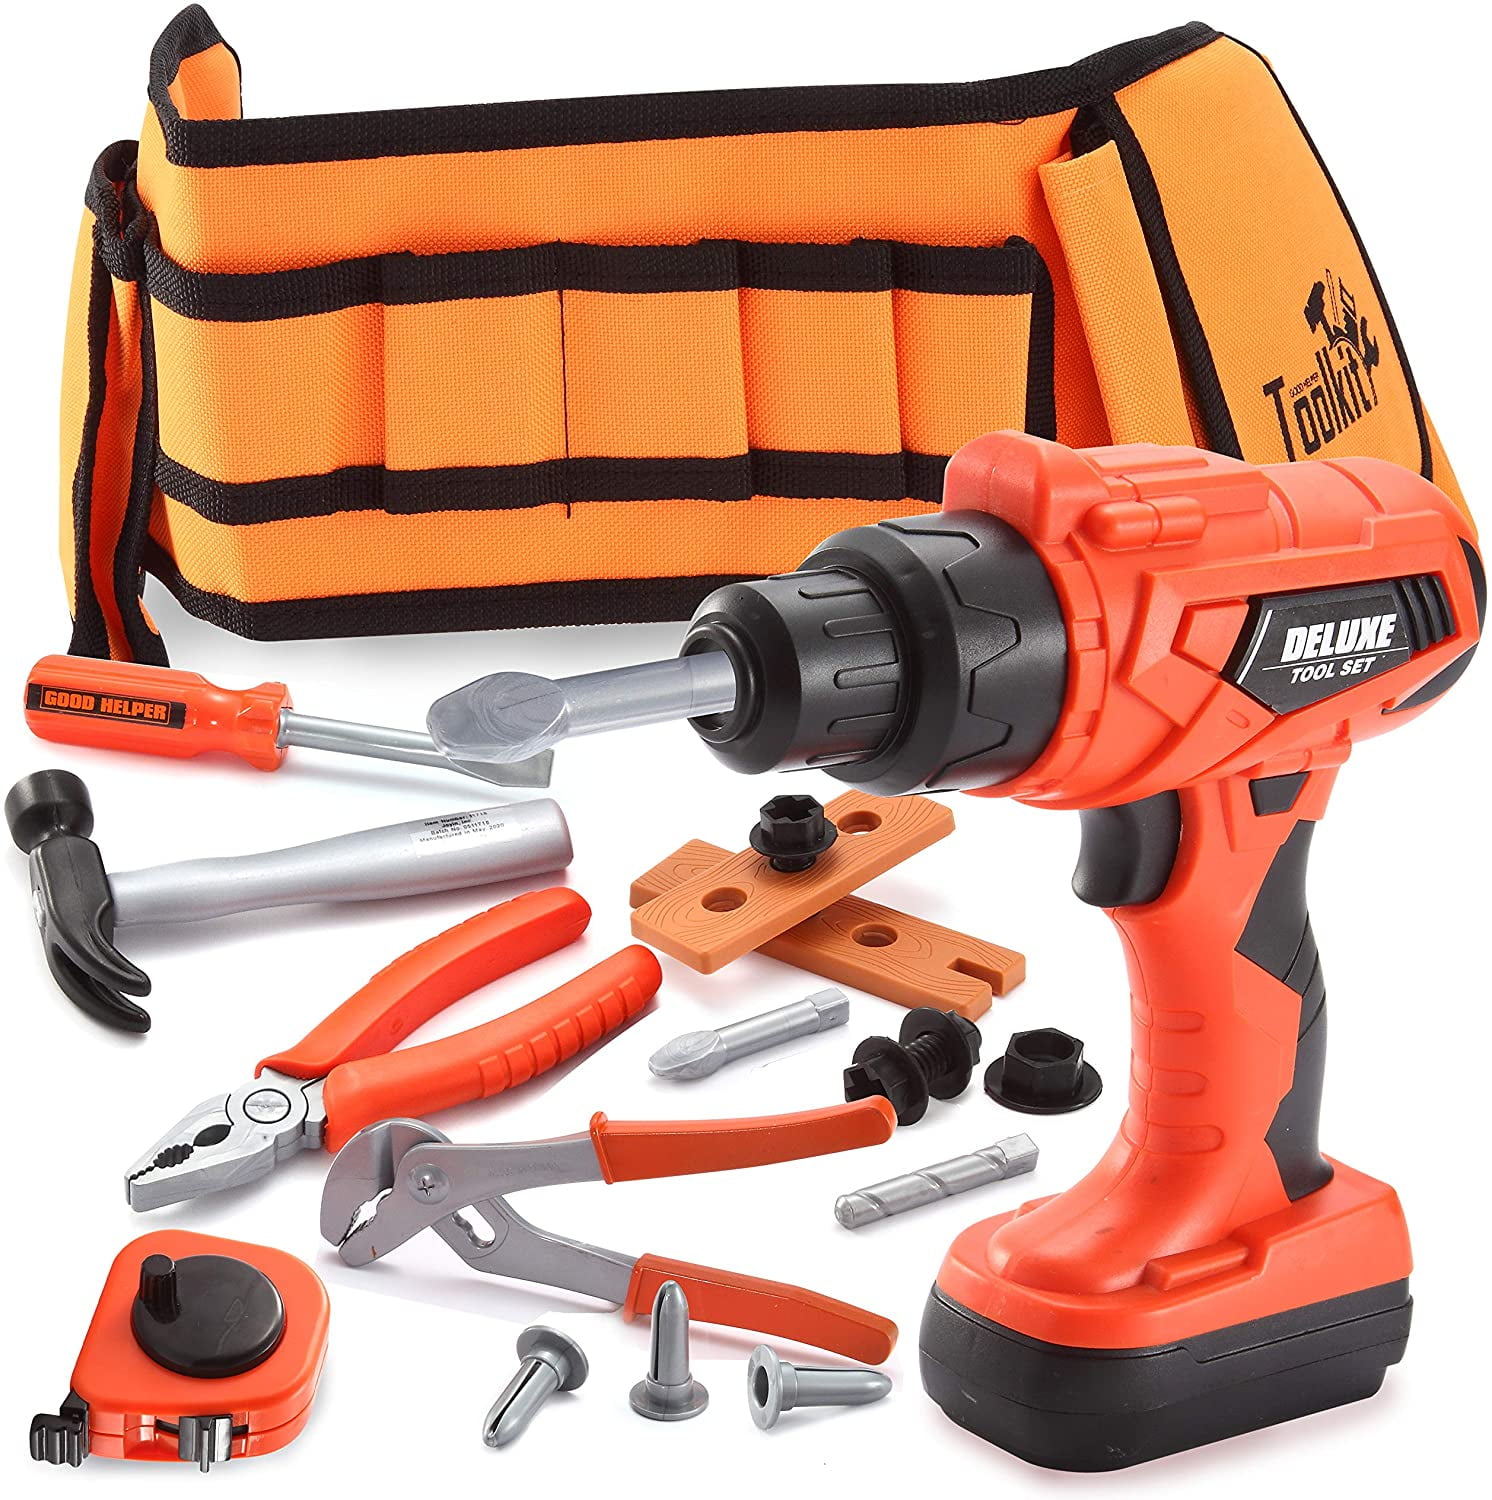 KIDS TOOL SET WITH BELT CONSTRUCTION TOYS WITH ELECTRIC DRILL HAMMER SCREWDRIVER 